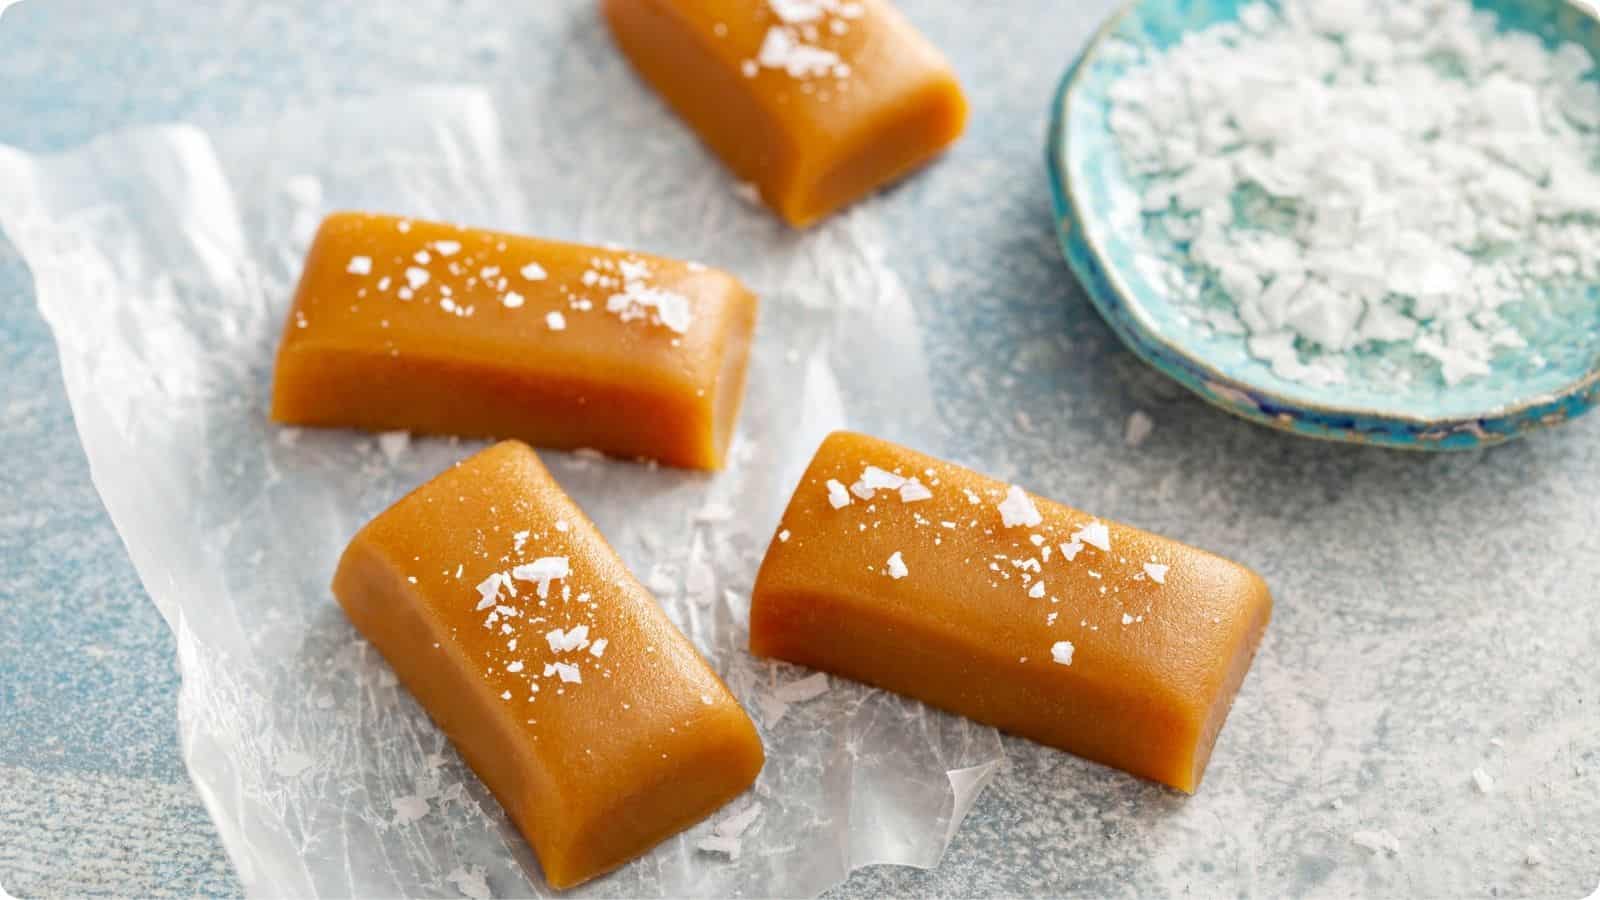 Caramel fudge candies with a sprinkle of sea salt, are displayed on a table.⁣⁣
⁣⁣⁣⁣⁣⁣⁣⁣⁣